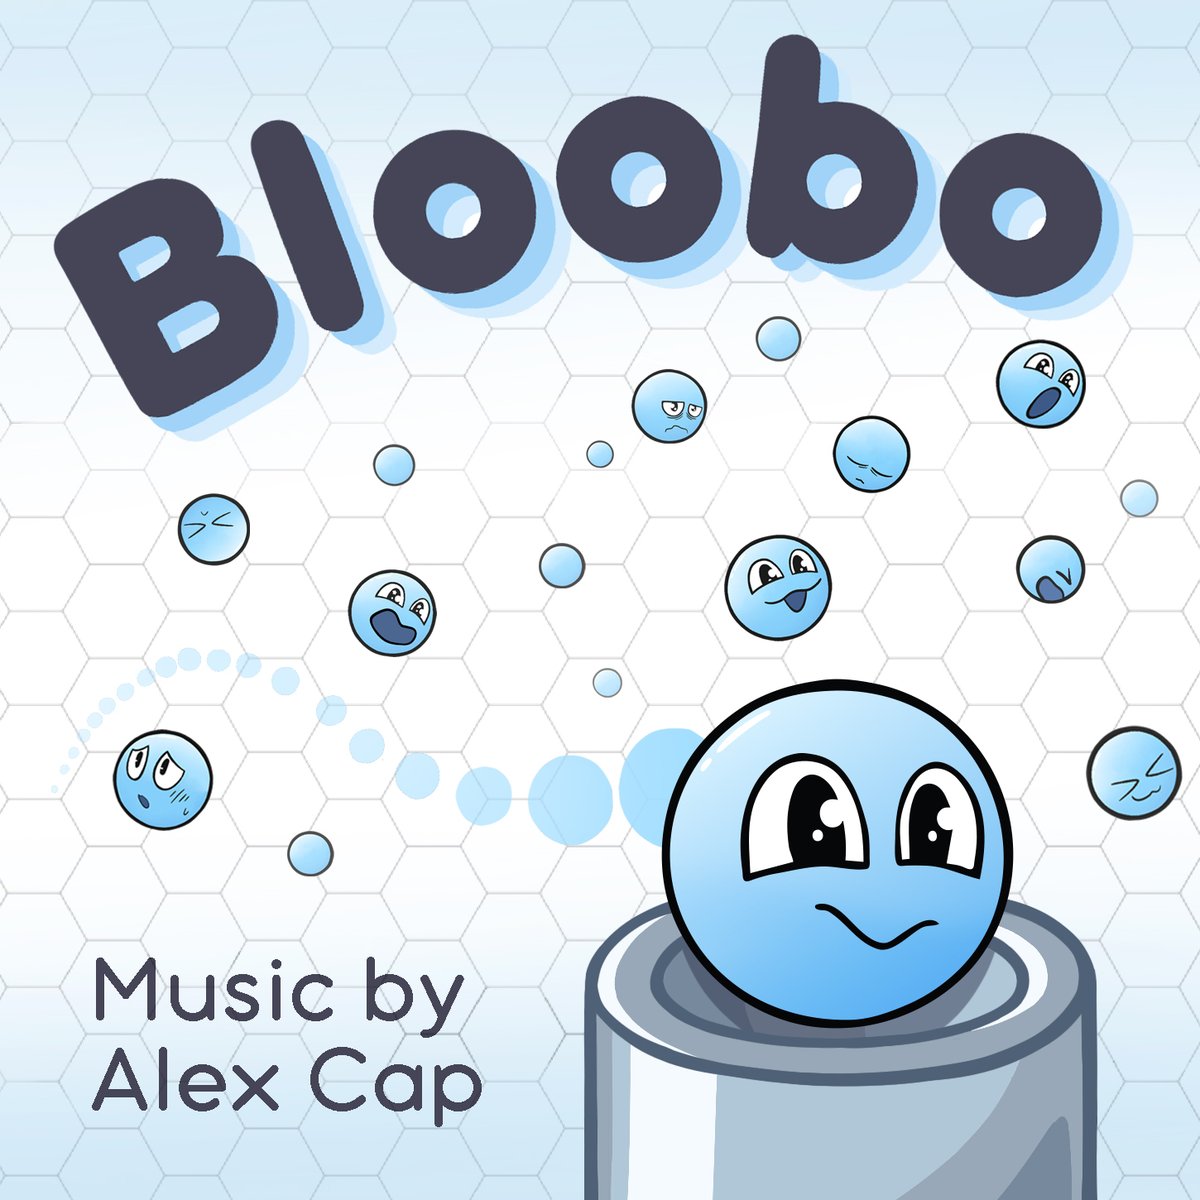 I've released the soundtrack for @BlooboGame, a physics-based puzzle game for iOS by @wears_glasses! Album artwork by @cluehere.

alexcap.mx/project/bloobo

#composer #gamecomposer #mediacomposer #videogamemusic #gamemusic #indiegames #gameaudio